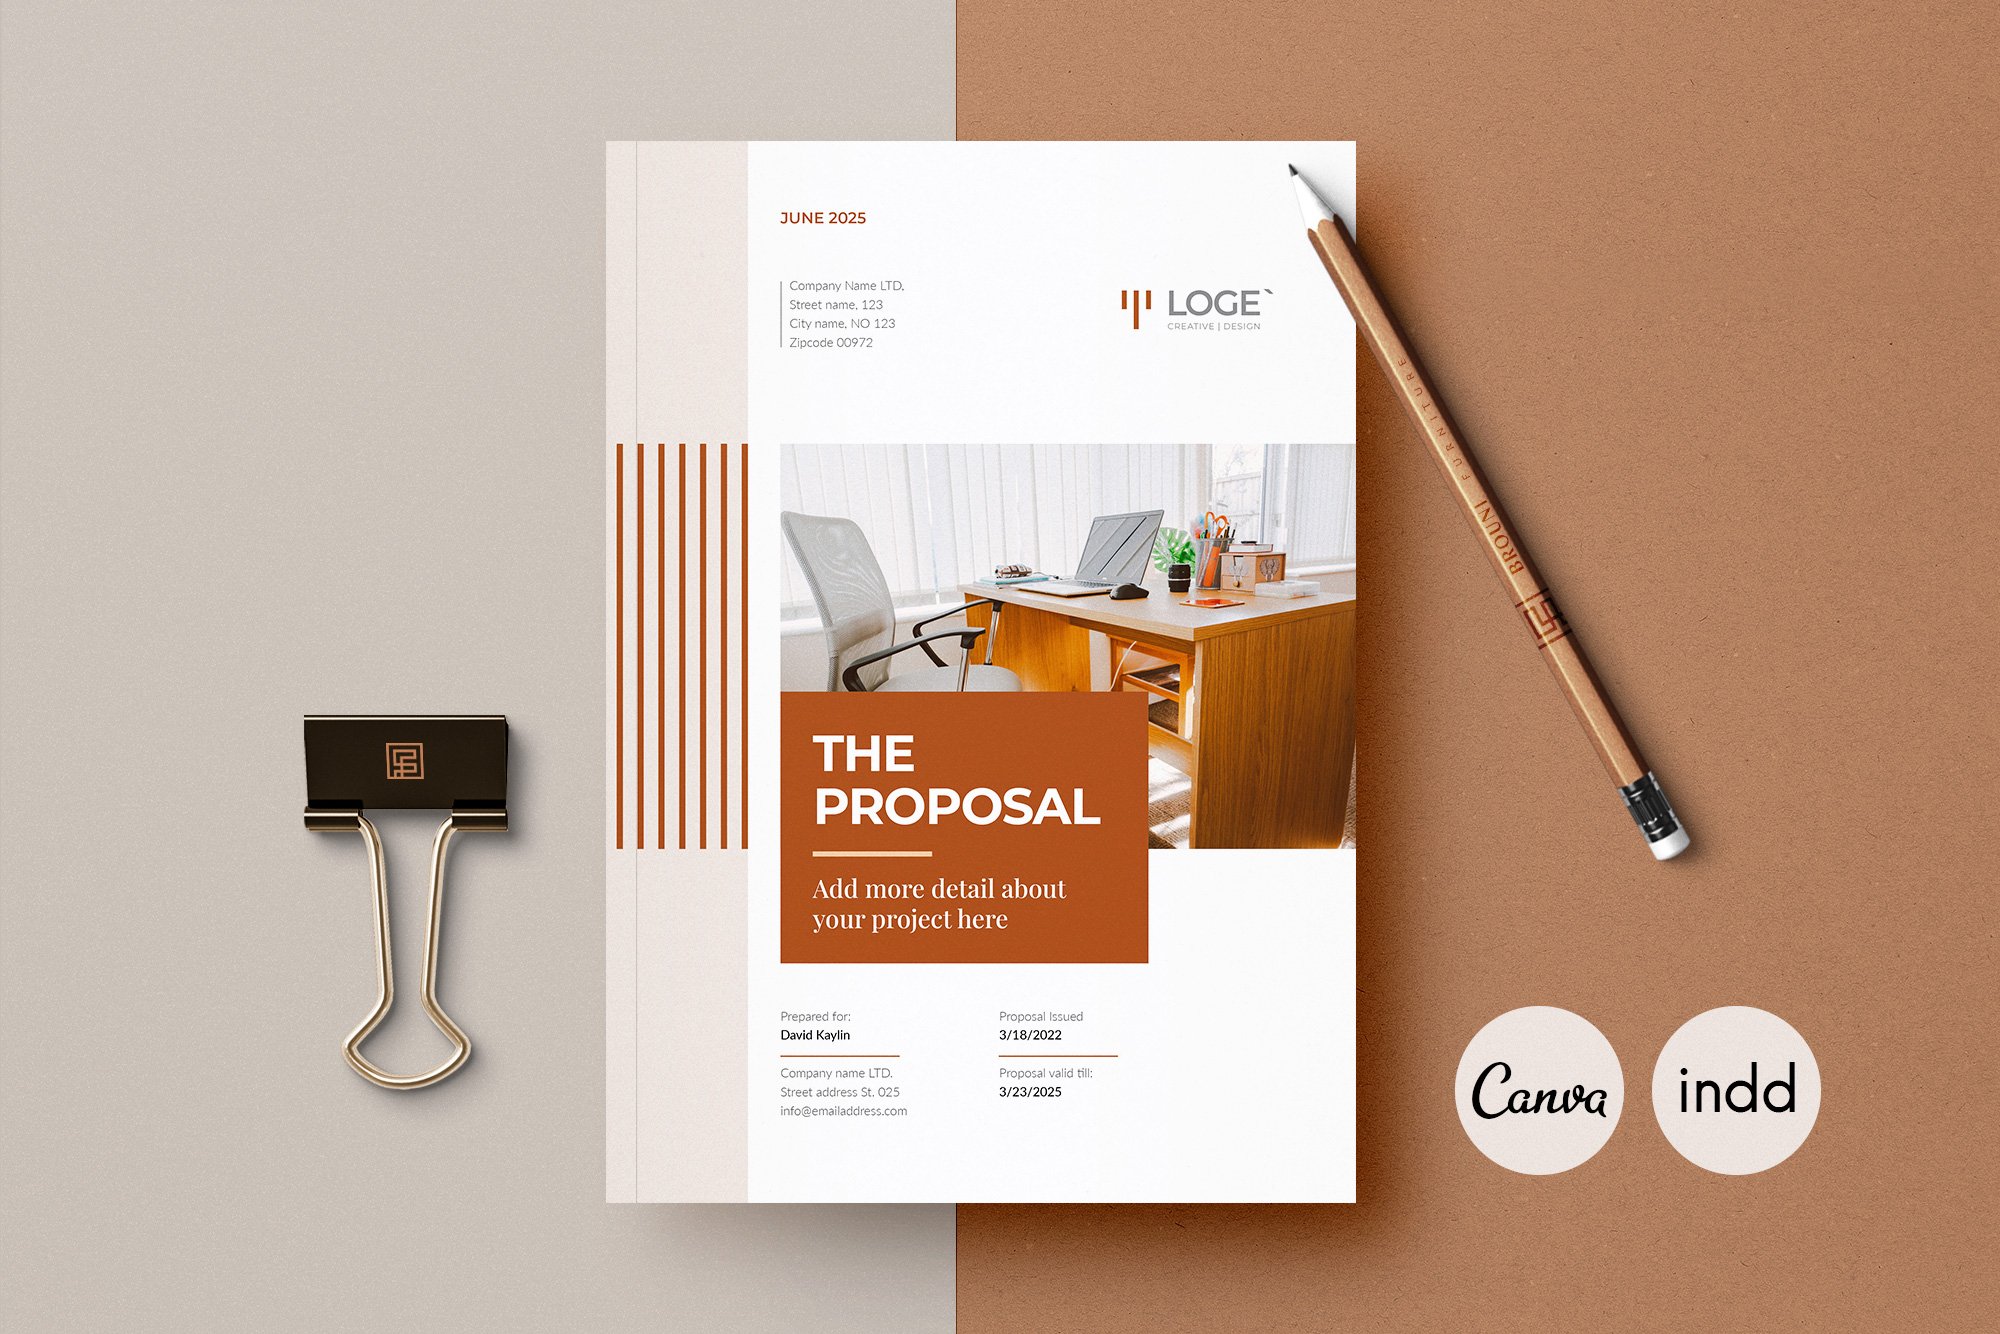 The Proposal | Canva, InDesign cover image.